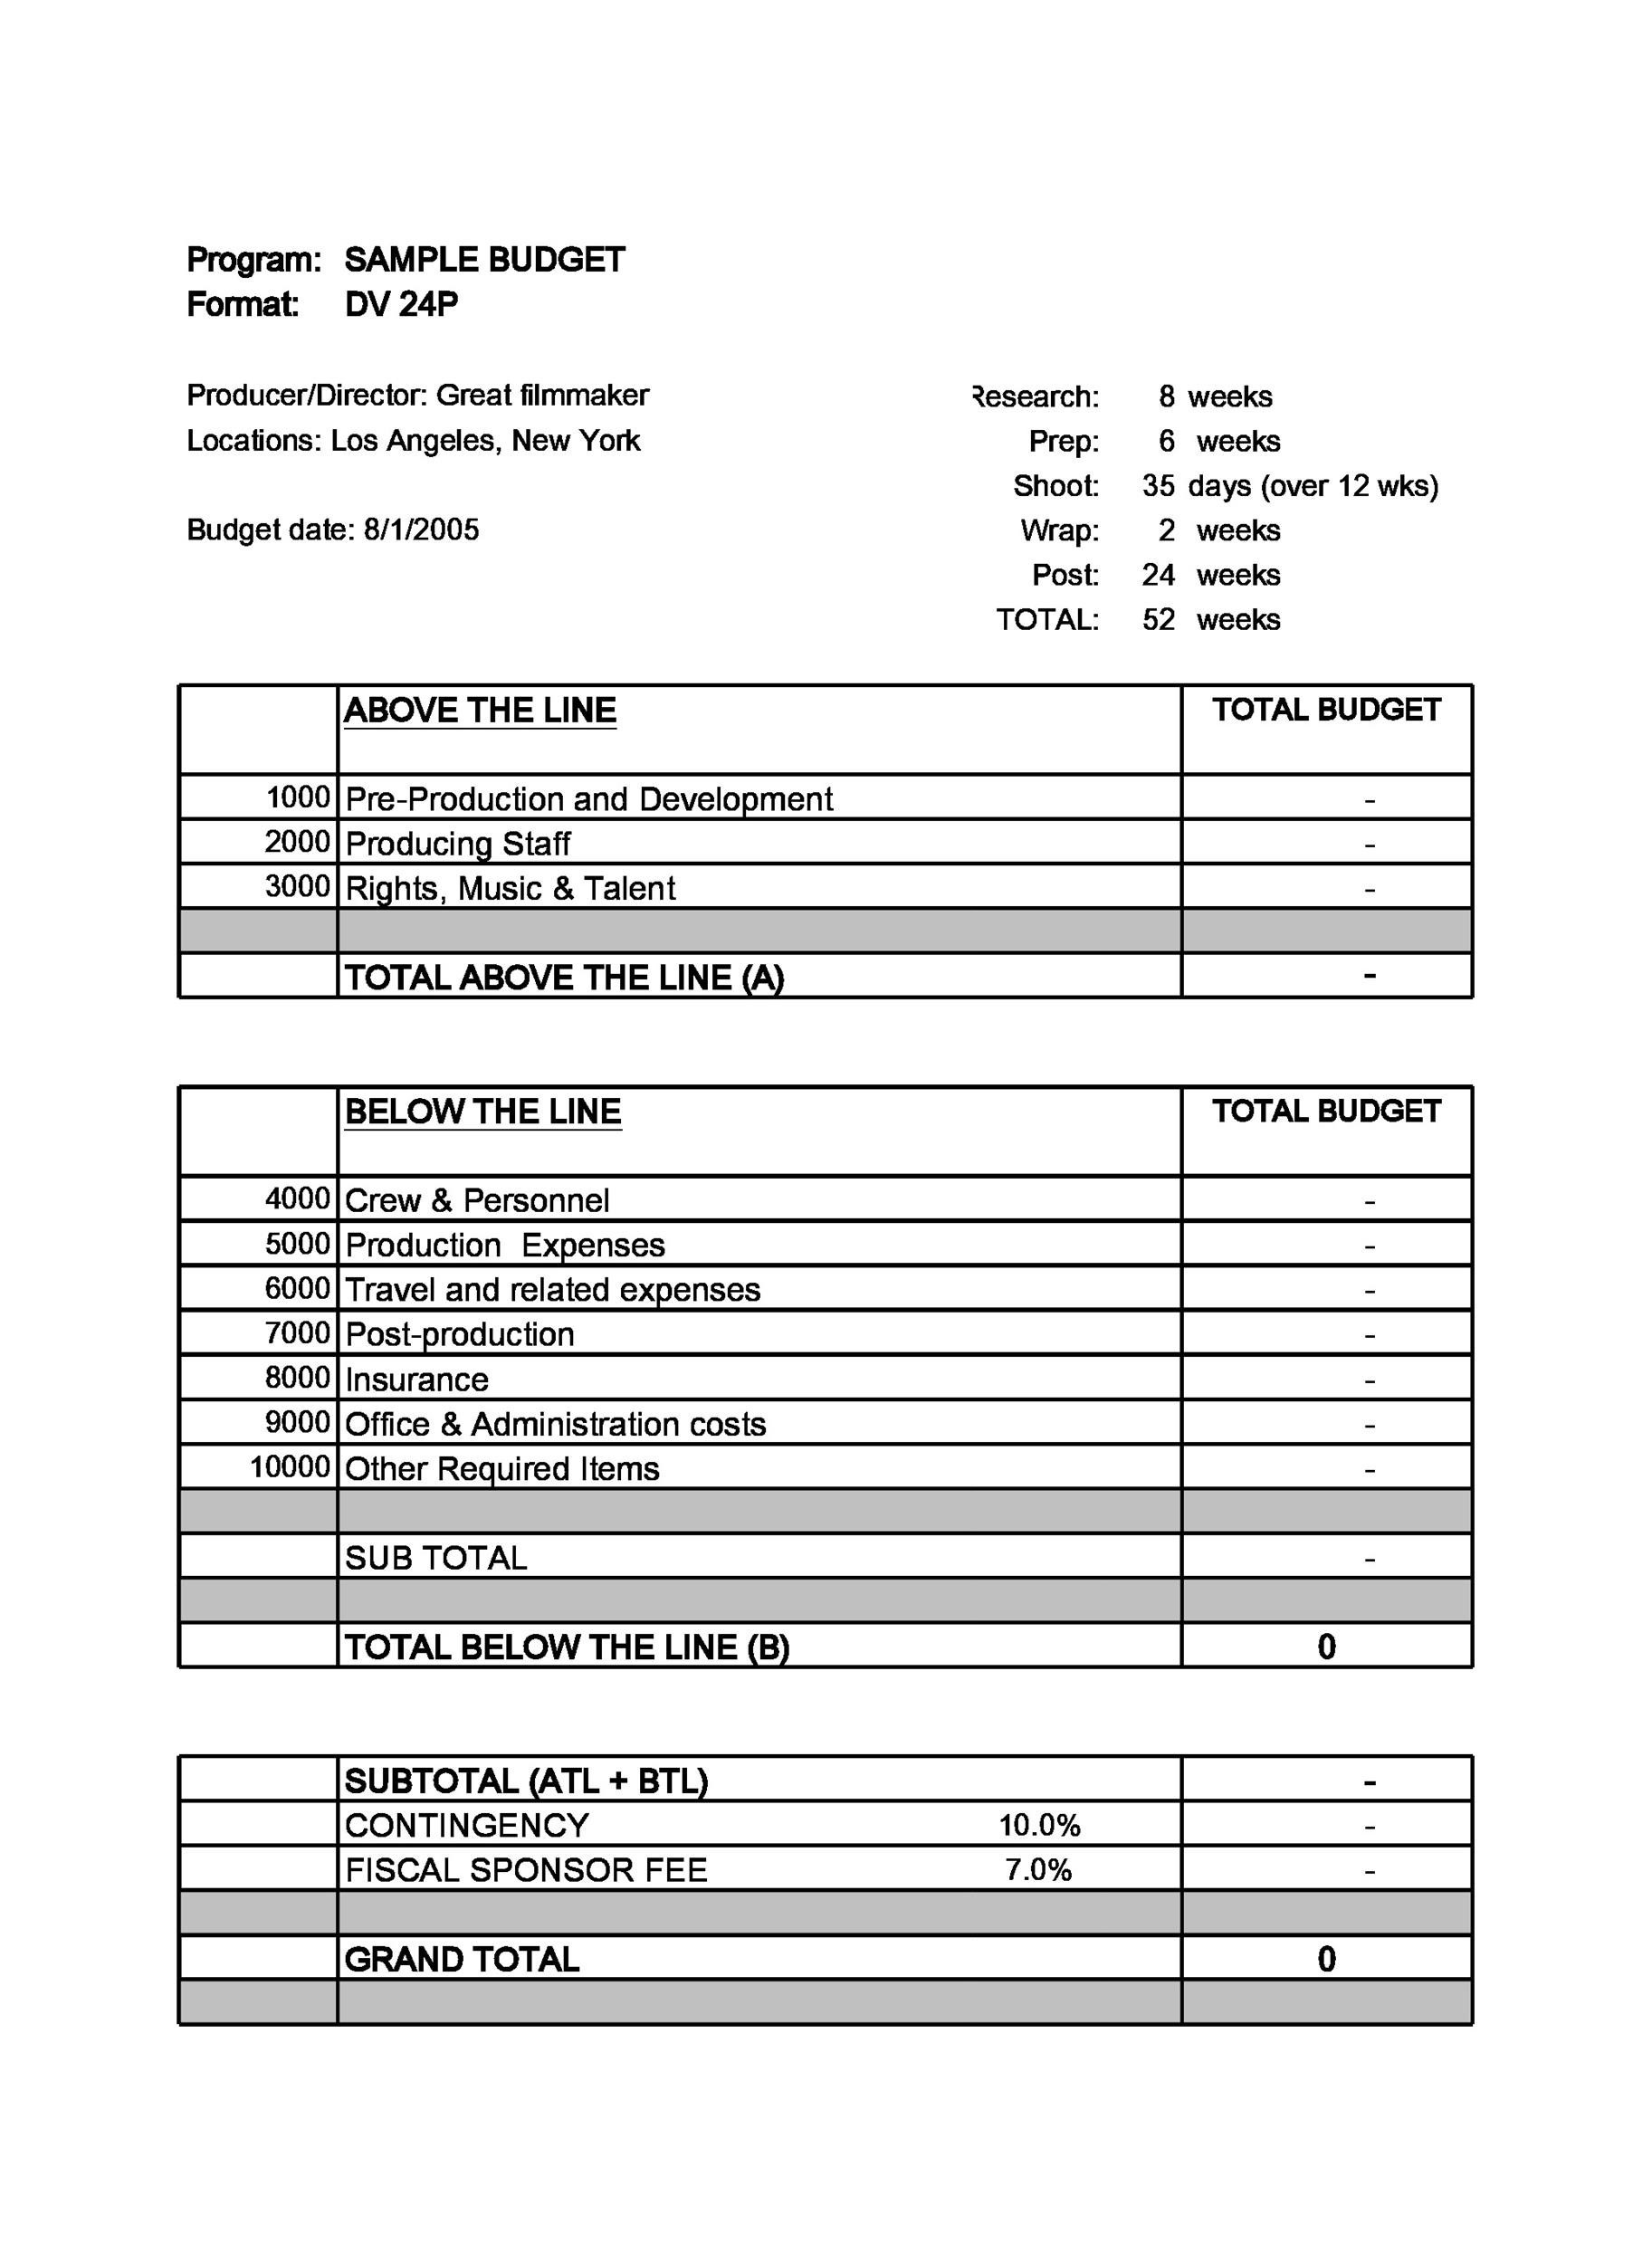 11 Free Film Budget Templates (Excel, Word) ᐅ TemplateLab Pertaining To Music Video Budget Template Intended For Music Video Budget Template